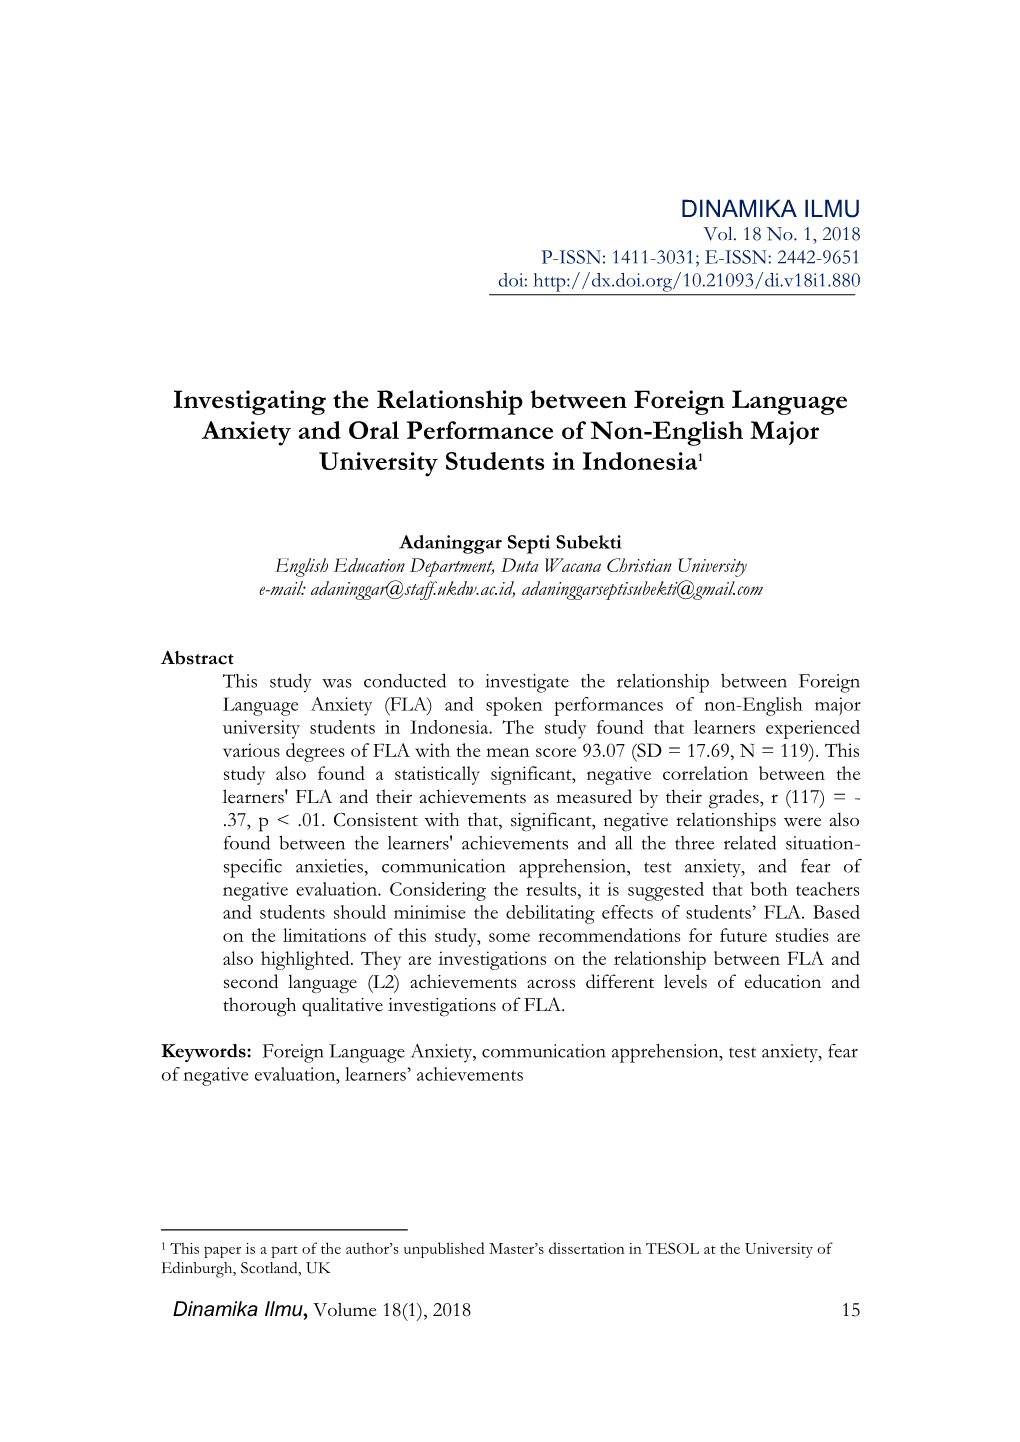 Investigating the Relationship Between Foreign Language Anxiety and Oral Performance